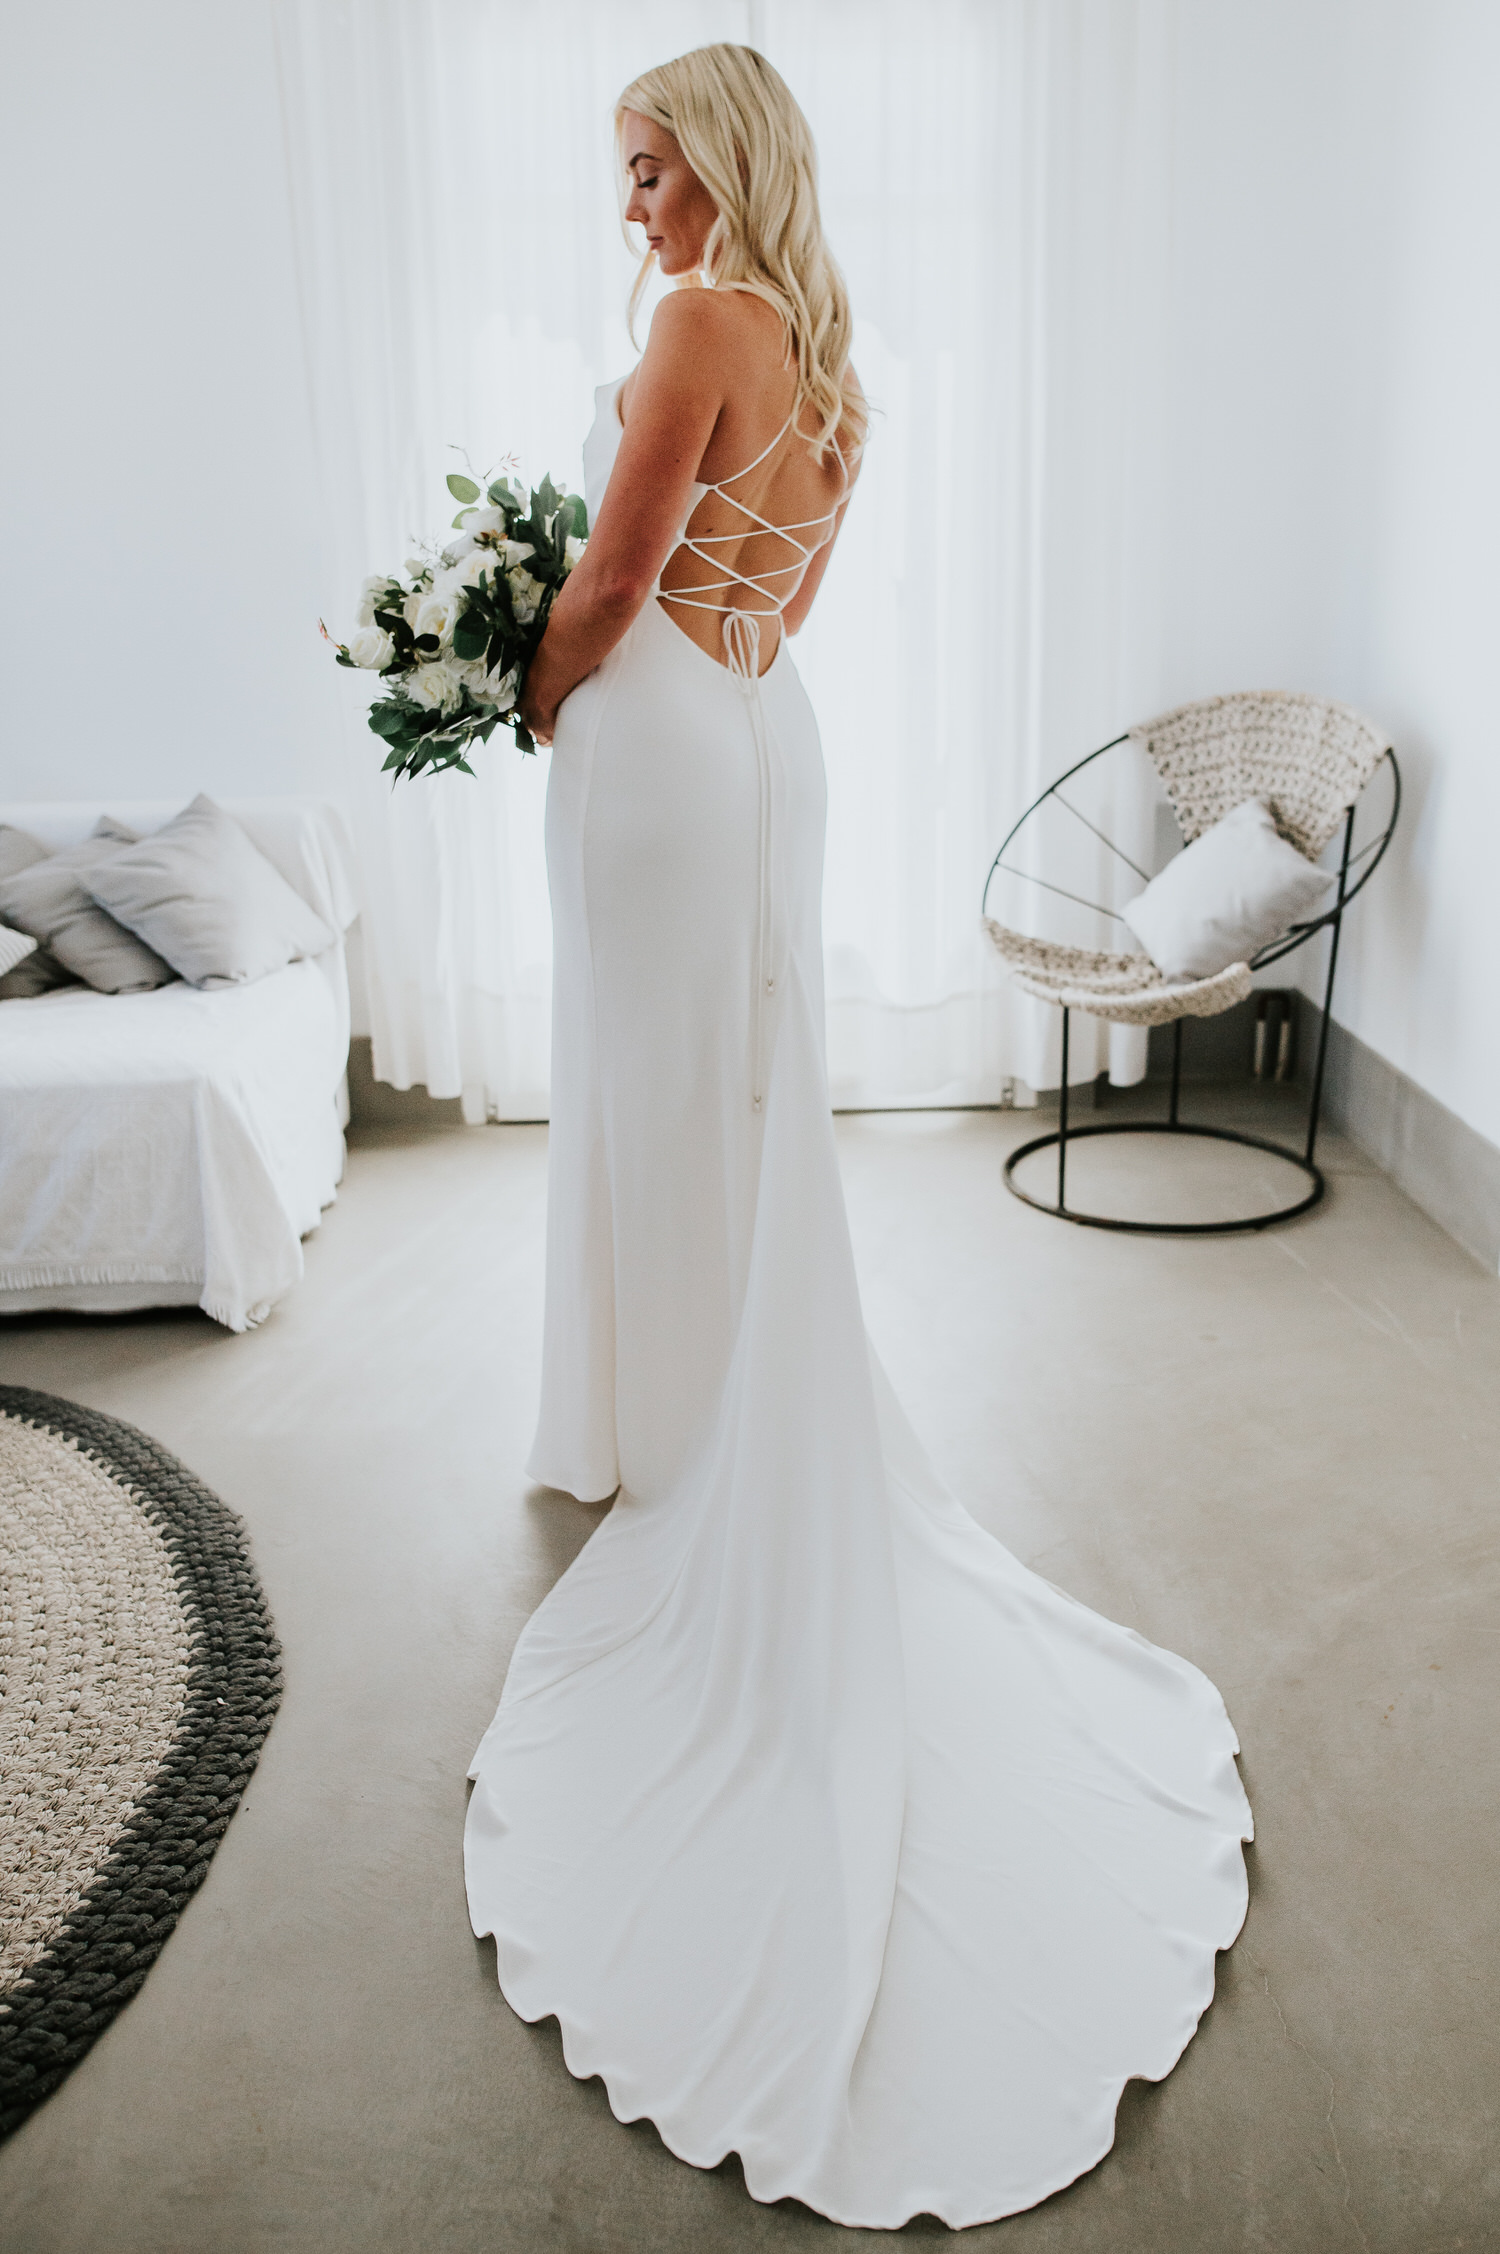 Mykonos wedding photographer: gorgeous bride holding bouquet showing her back of the wedding dress in the room.